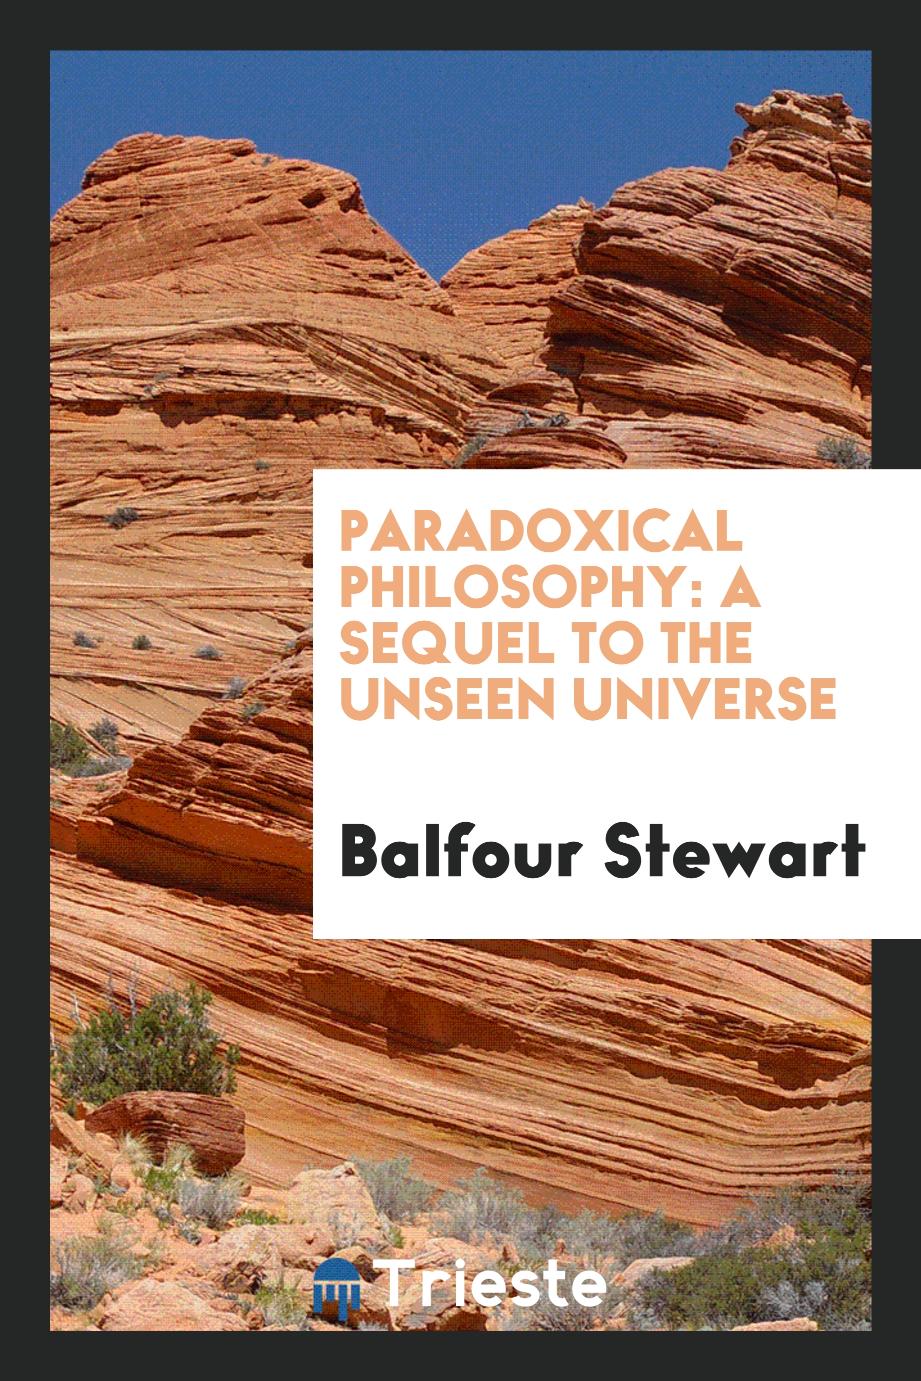 Paradoxical Philosophy: A Sequel to the Unseen Universe